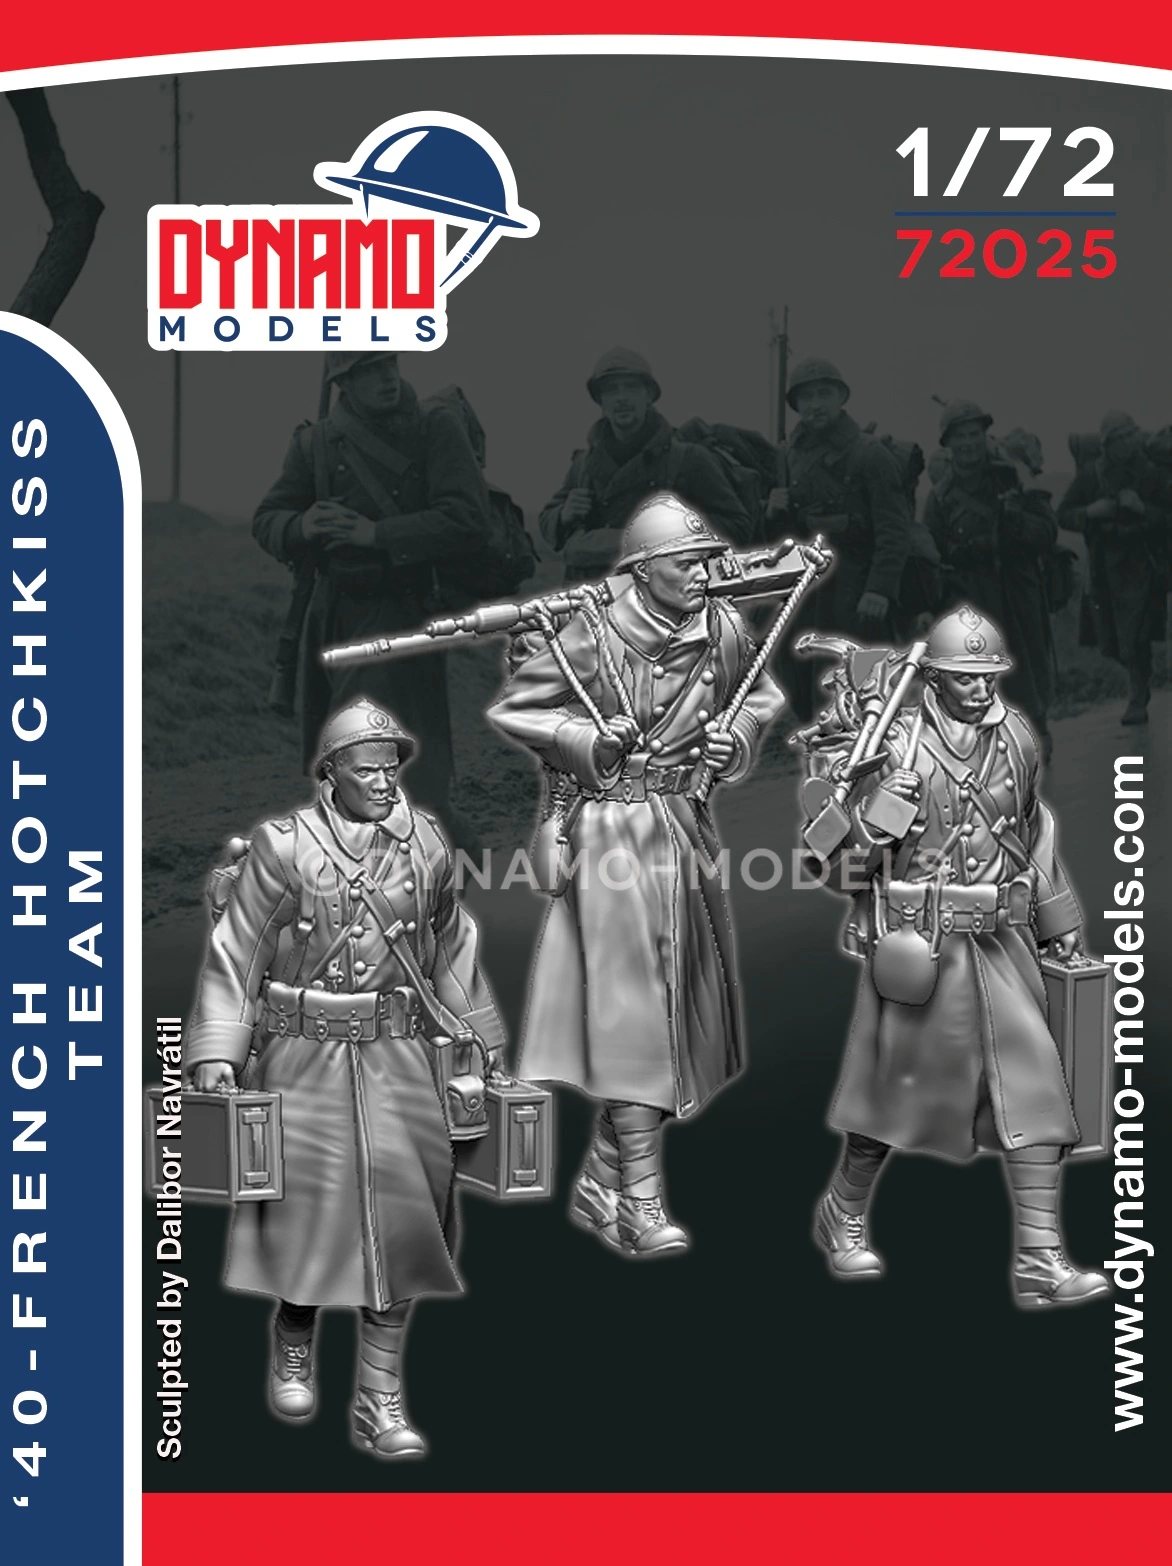 French Infantry Marching - France 1940 - set 5